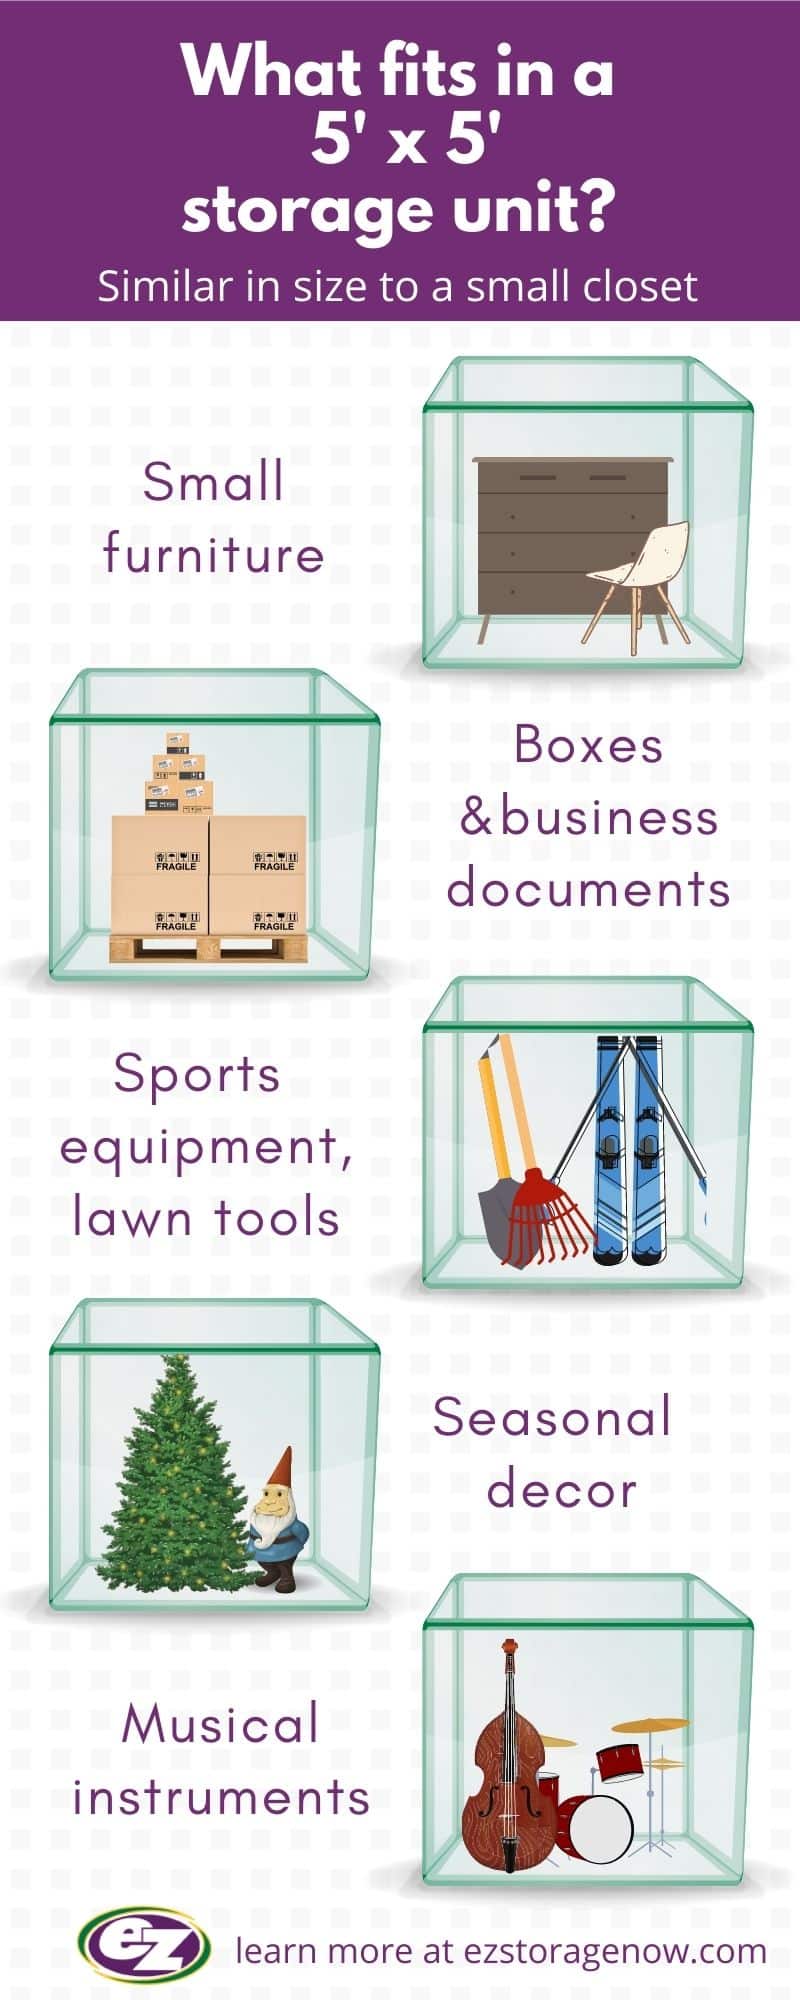 Infographic of what fits in a 5x5 storage unit.